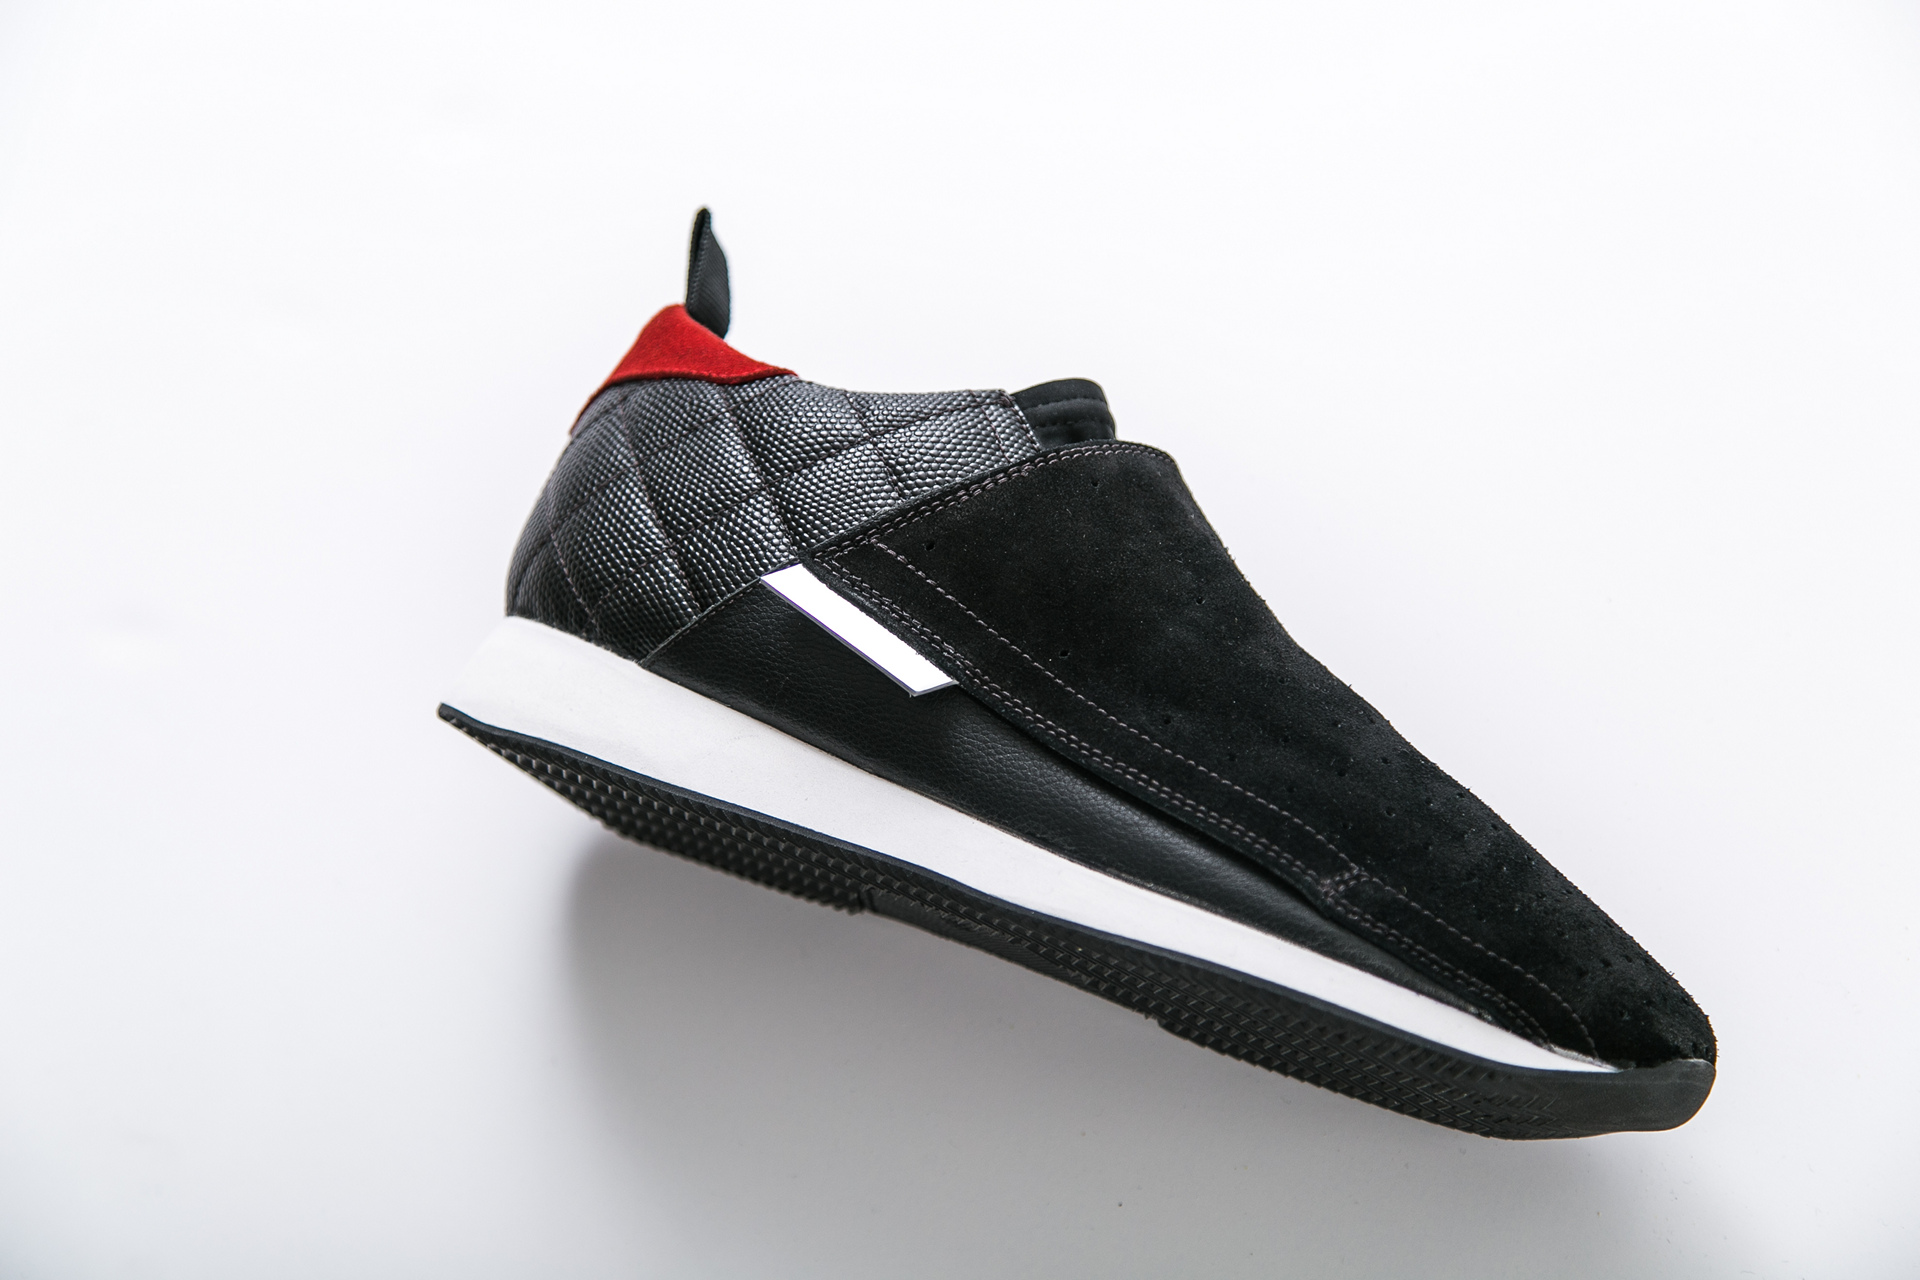 Thrillist, JackThreads and Honda Team Up to Create Exclusive HT3 Driving Shoe © Honda Motor Co., Ltd.